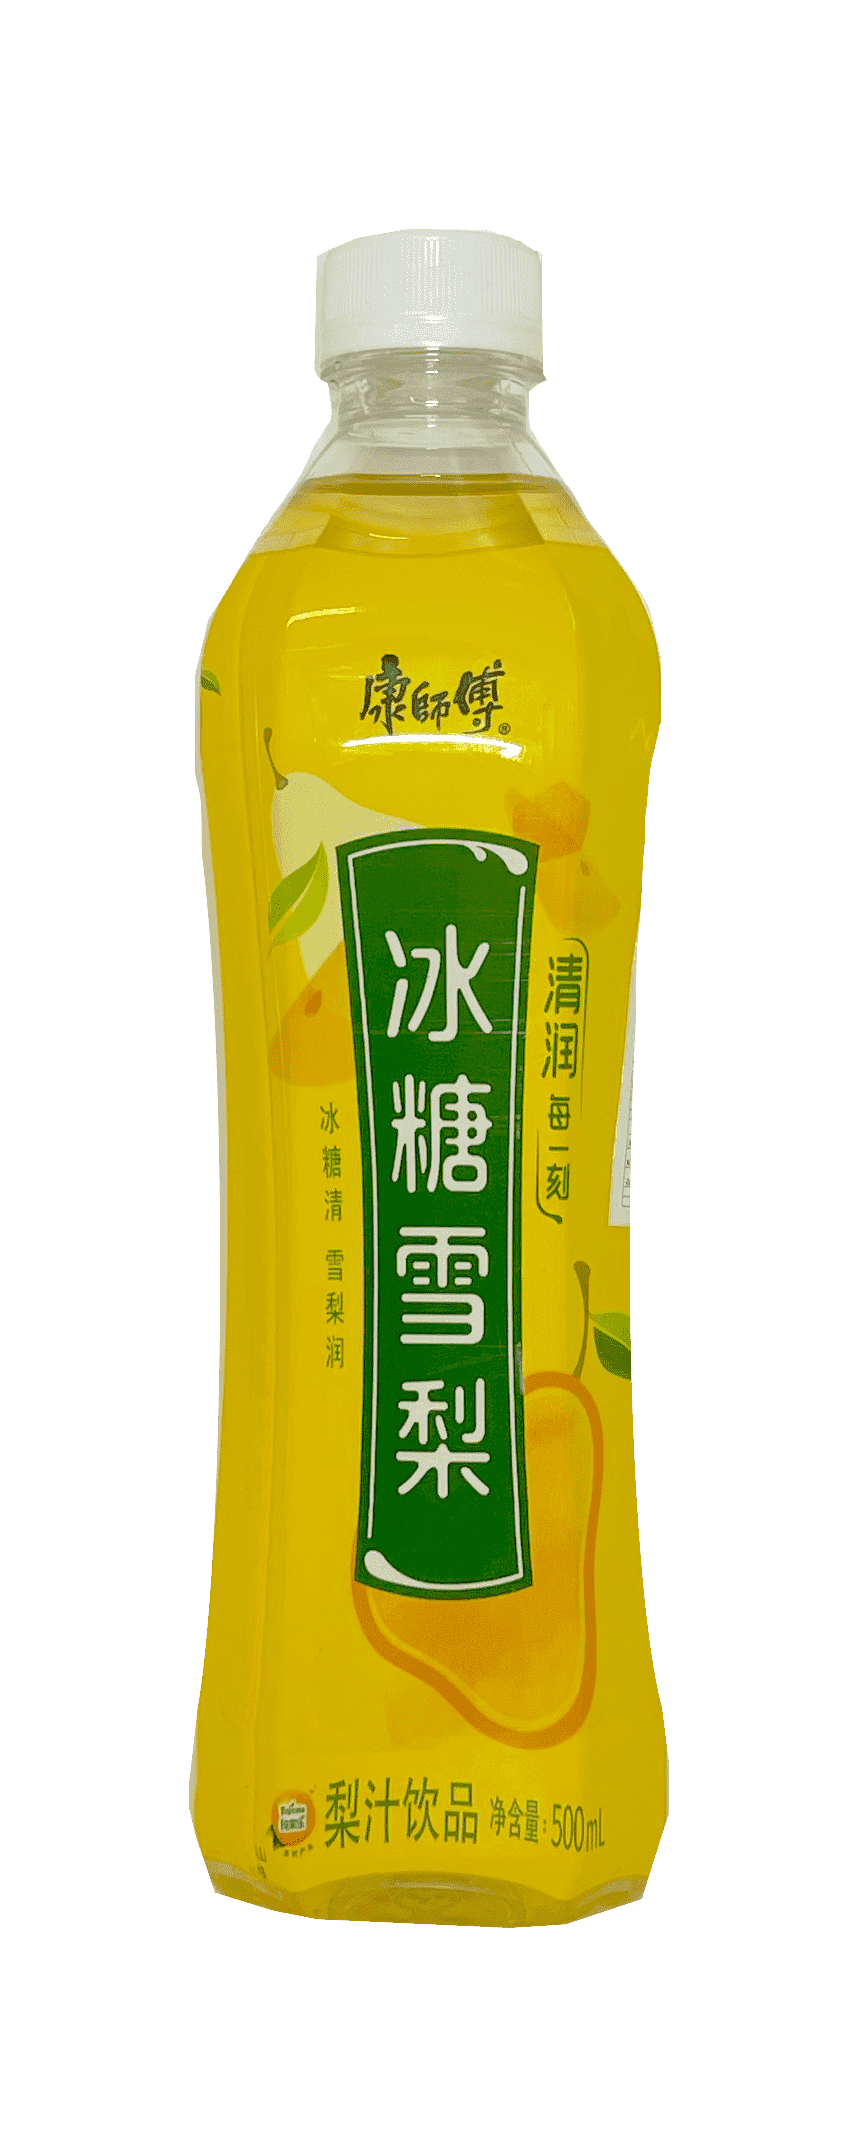 Drink Pear Flavour 500ml KSF China